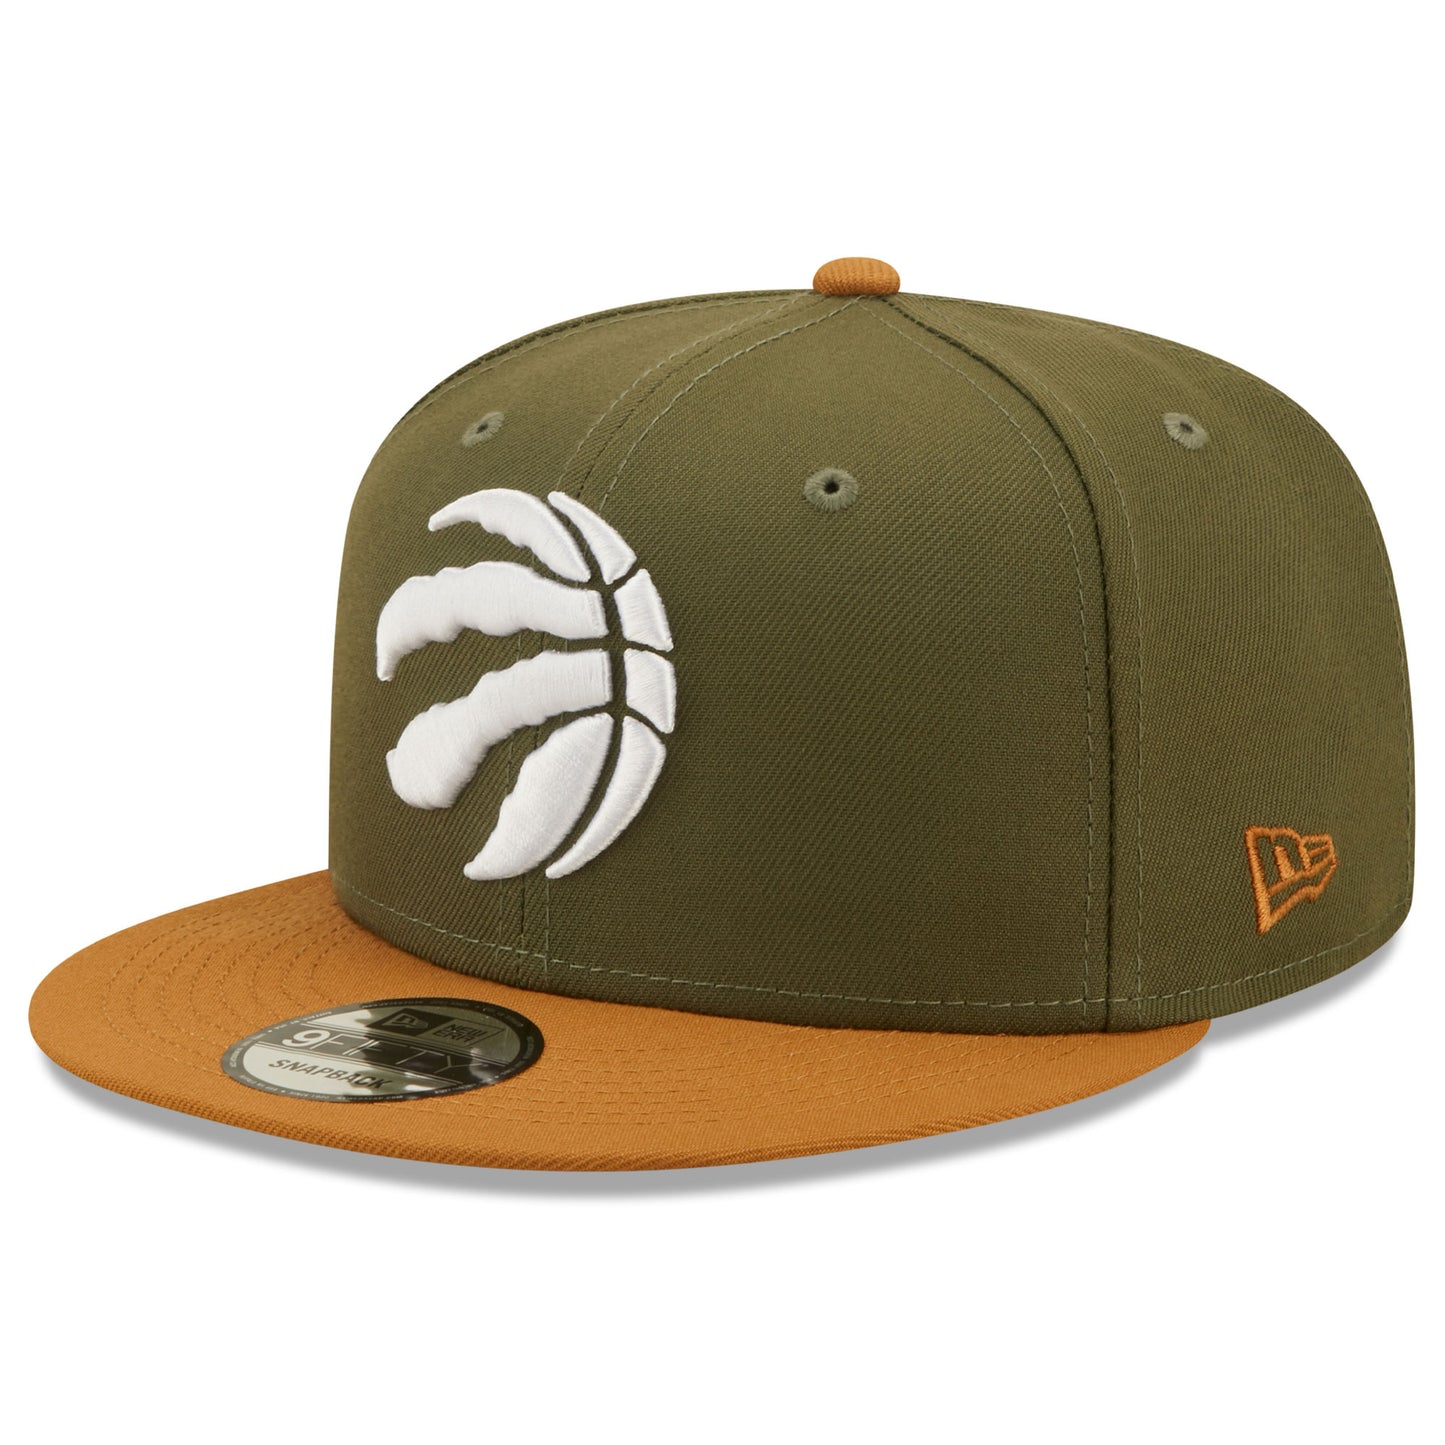 Toronto Raptors New Era Two-Tone Color Pack 9FIFTY Snapback Hat - Olive/Brown